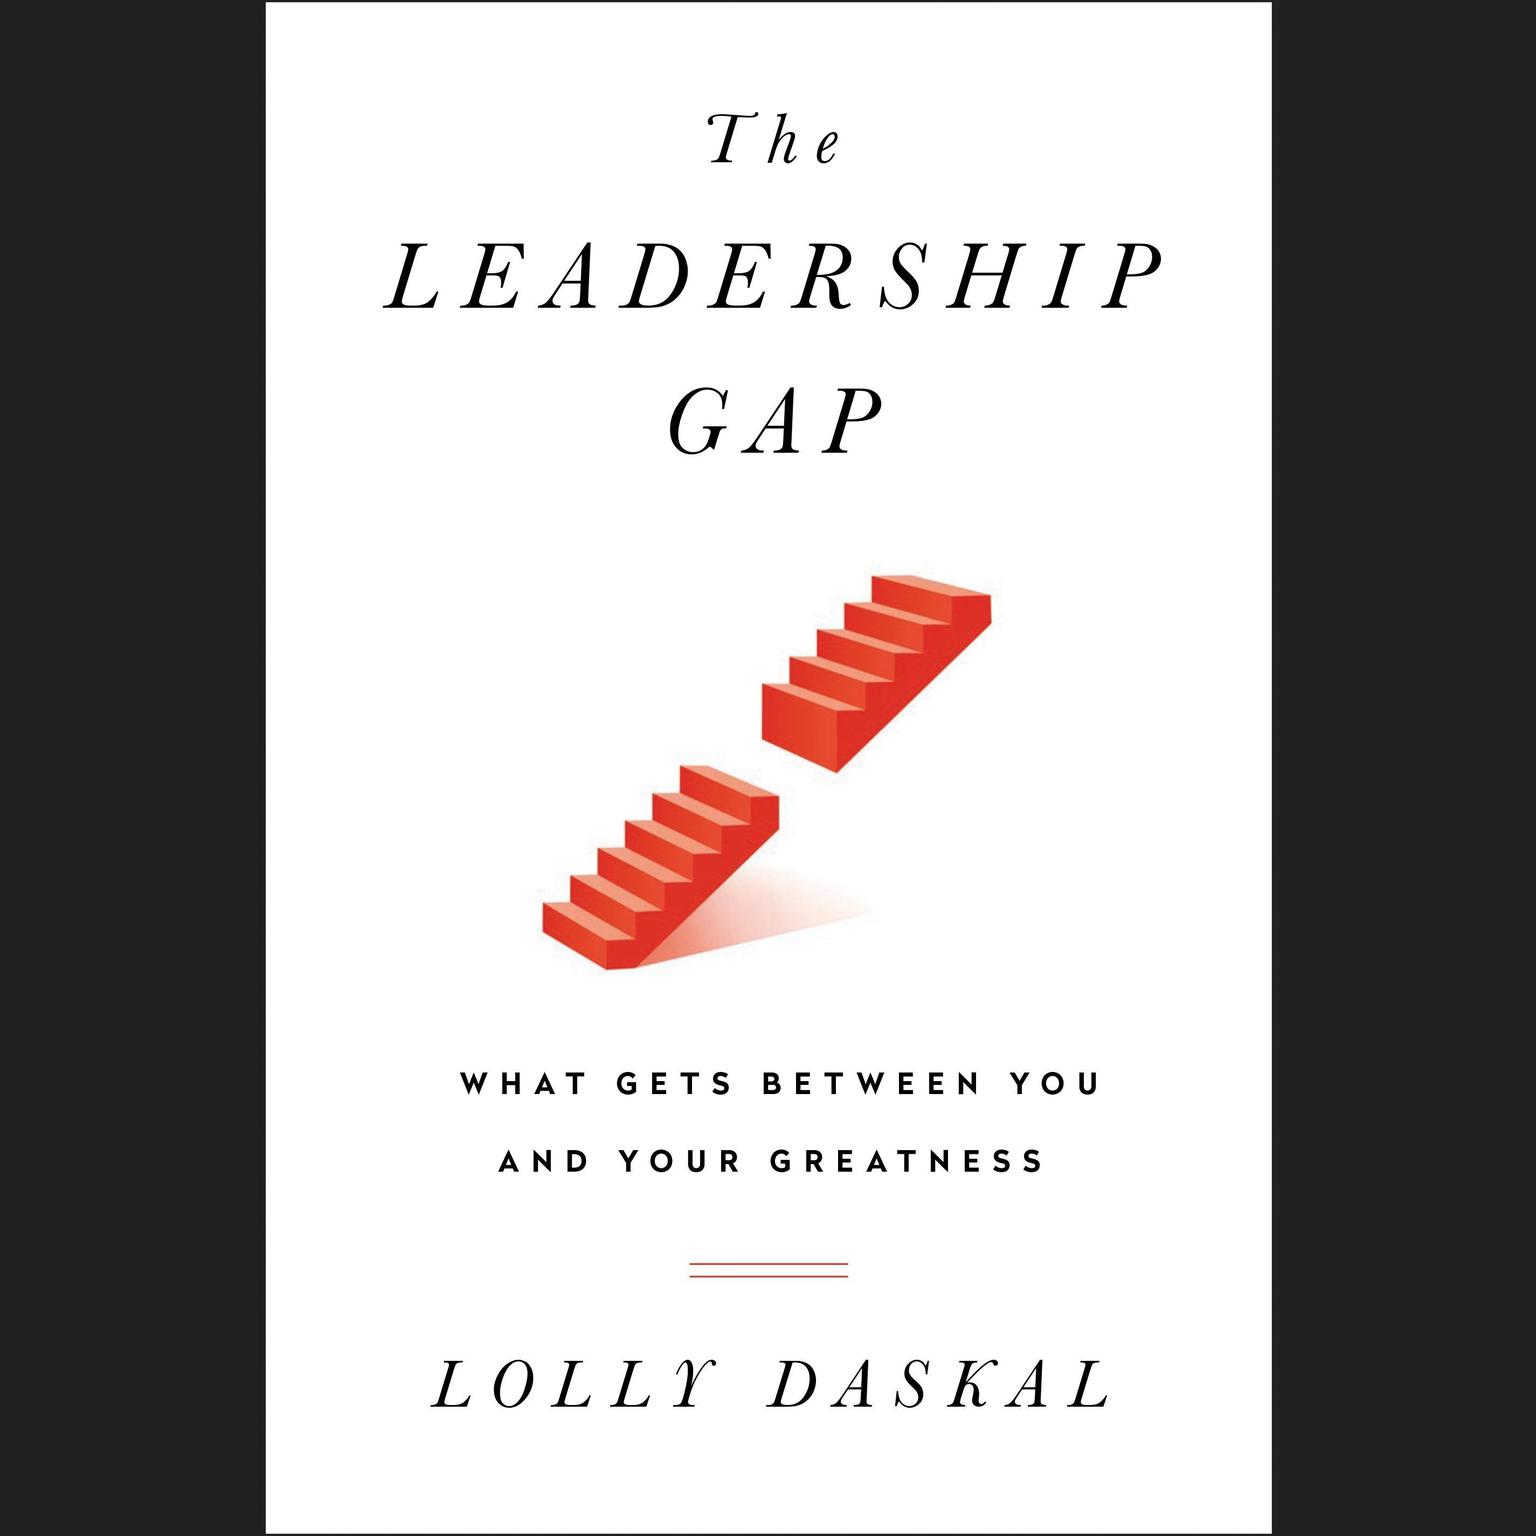 The Leadership Gap: What Gets Between You and Your Greatness Audiobook, by Lolly Daskal